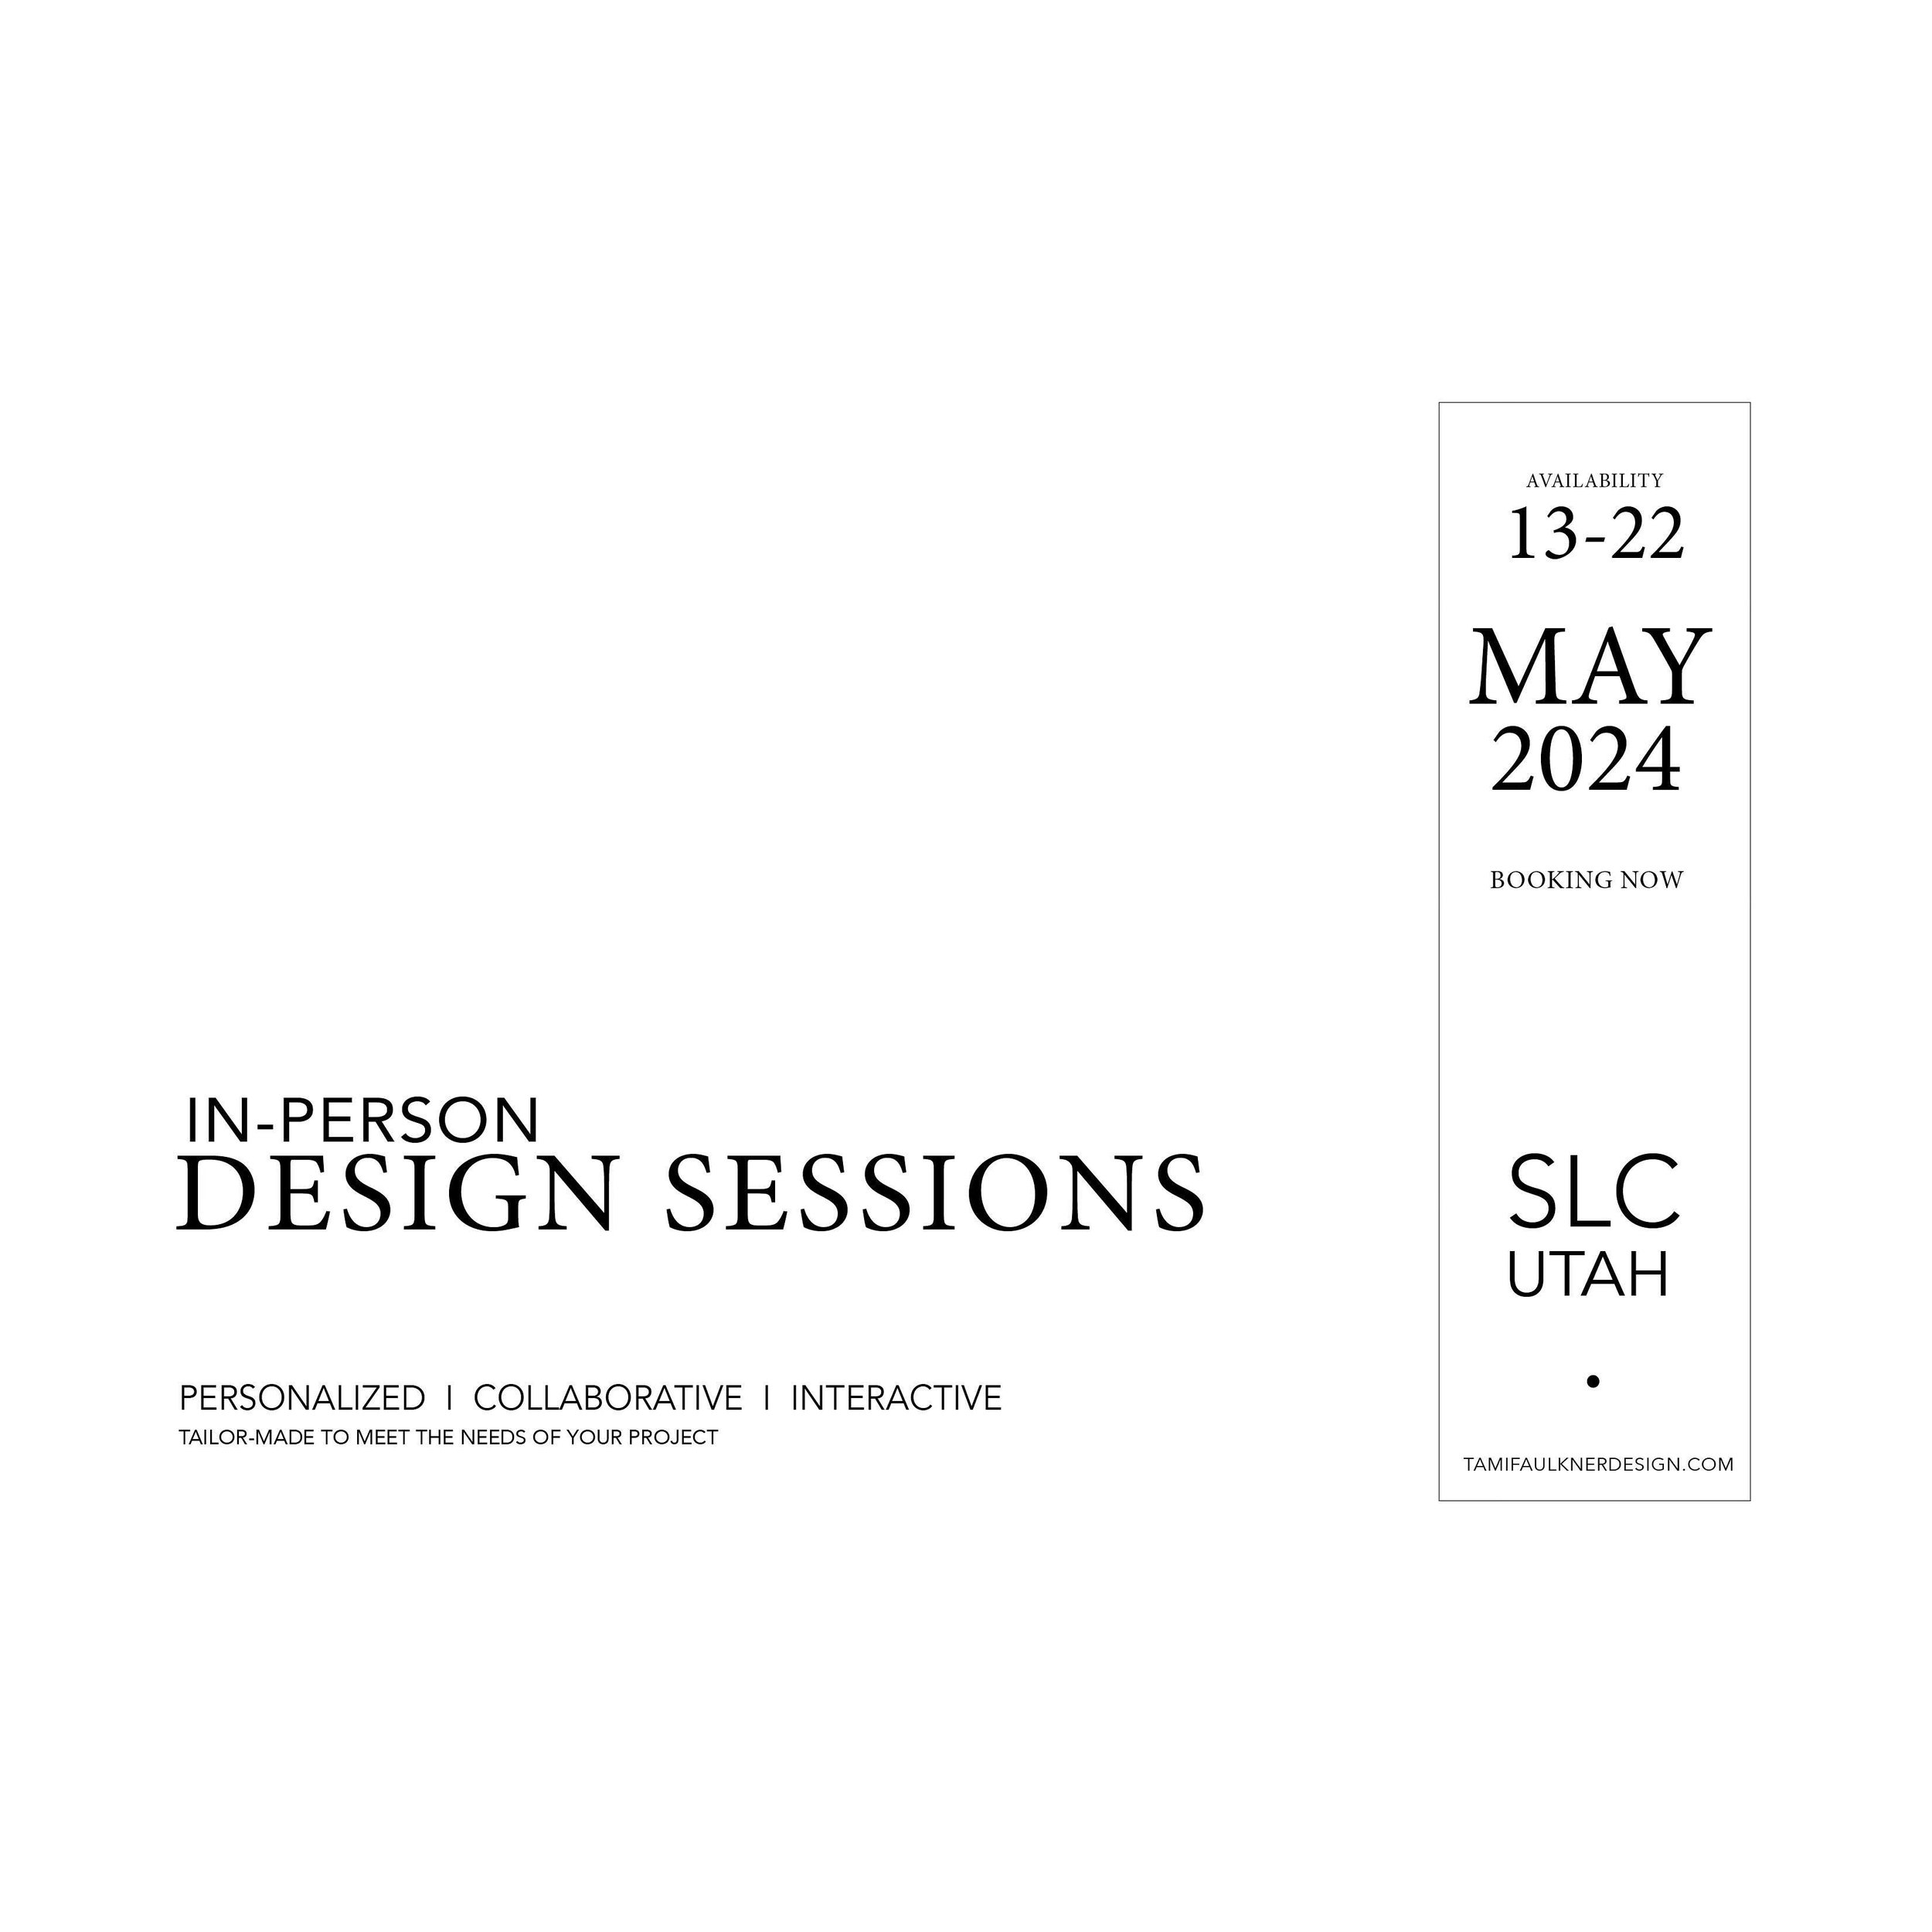 I look forward to sitting across and side-by-side with clients during the in-person Design Sessions held near Salt Lake City, Utah, for two weeks in May. *Follow the link in my bio to learn more about the new collaborative sessions.